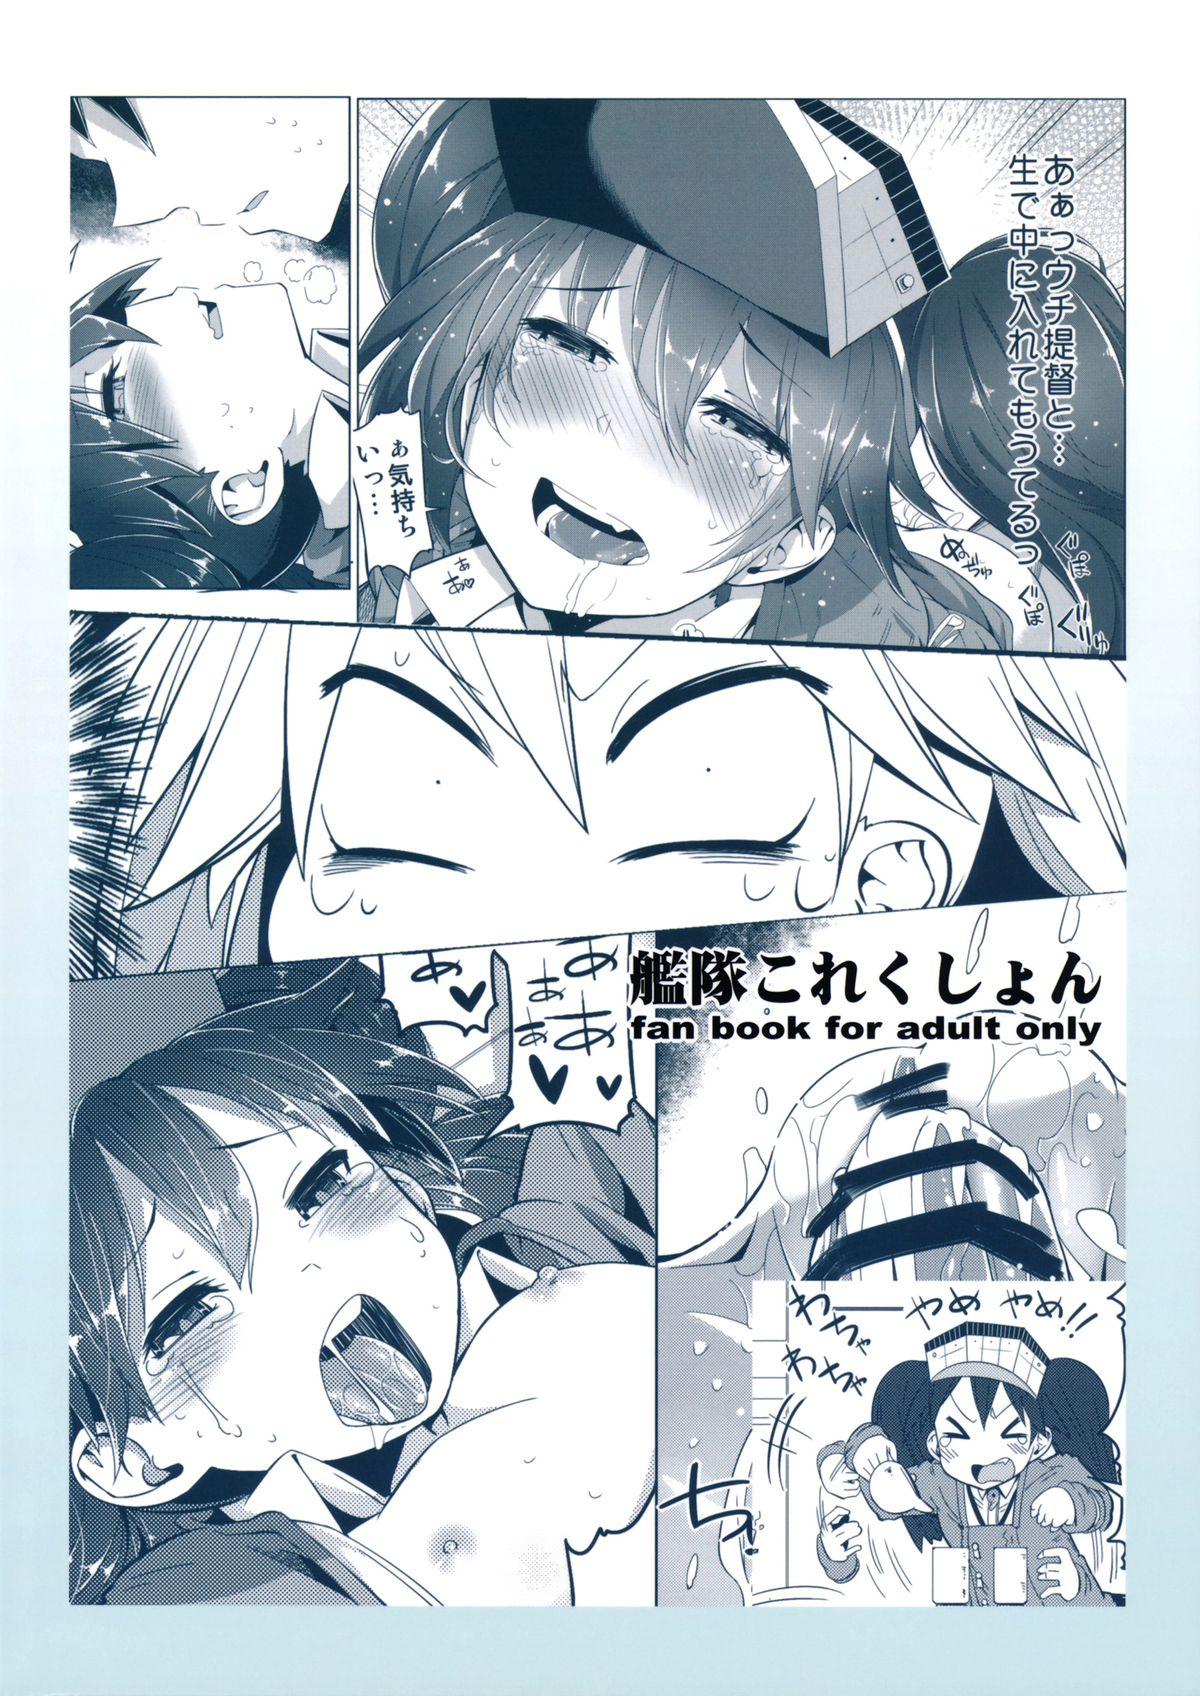 Female Koi suru Otome no Miryoku wa Mune dake janai! | The Allure of a Maiden in Love isn't Only in Her Chest! - Kantai collection Romantic - Page 22